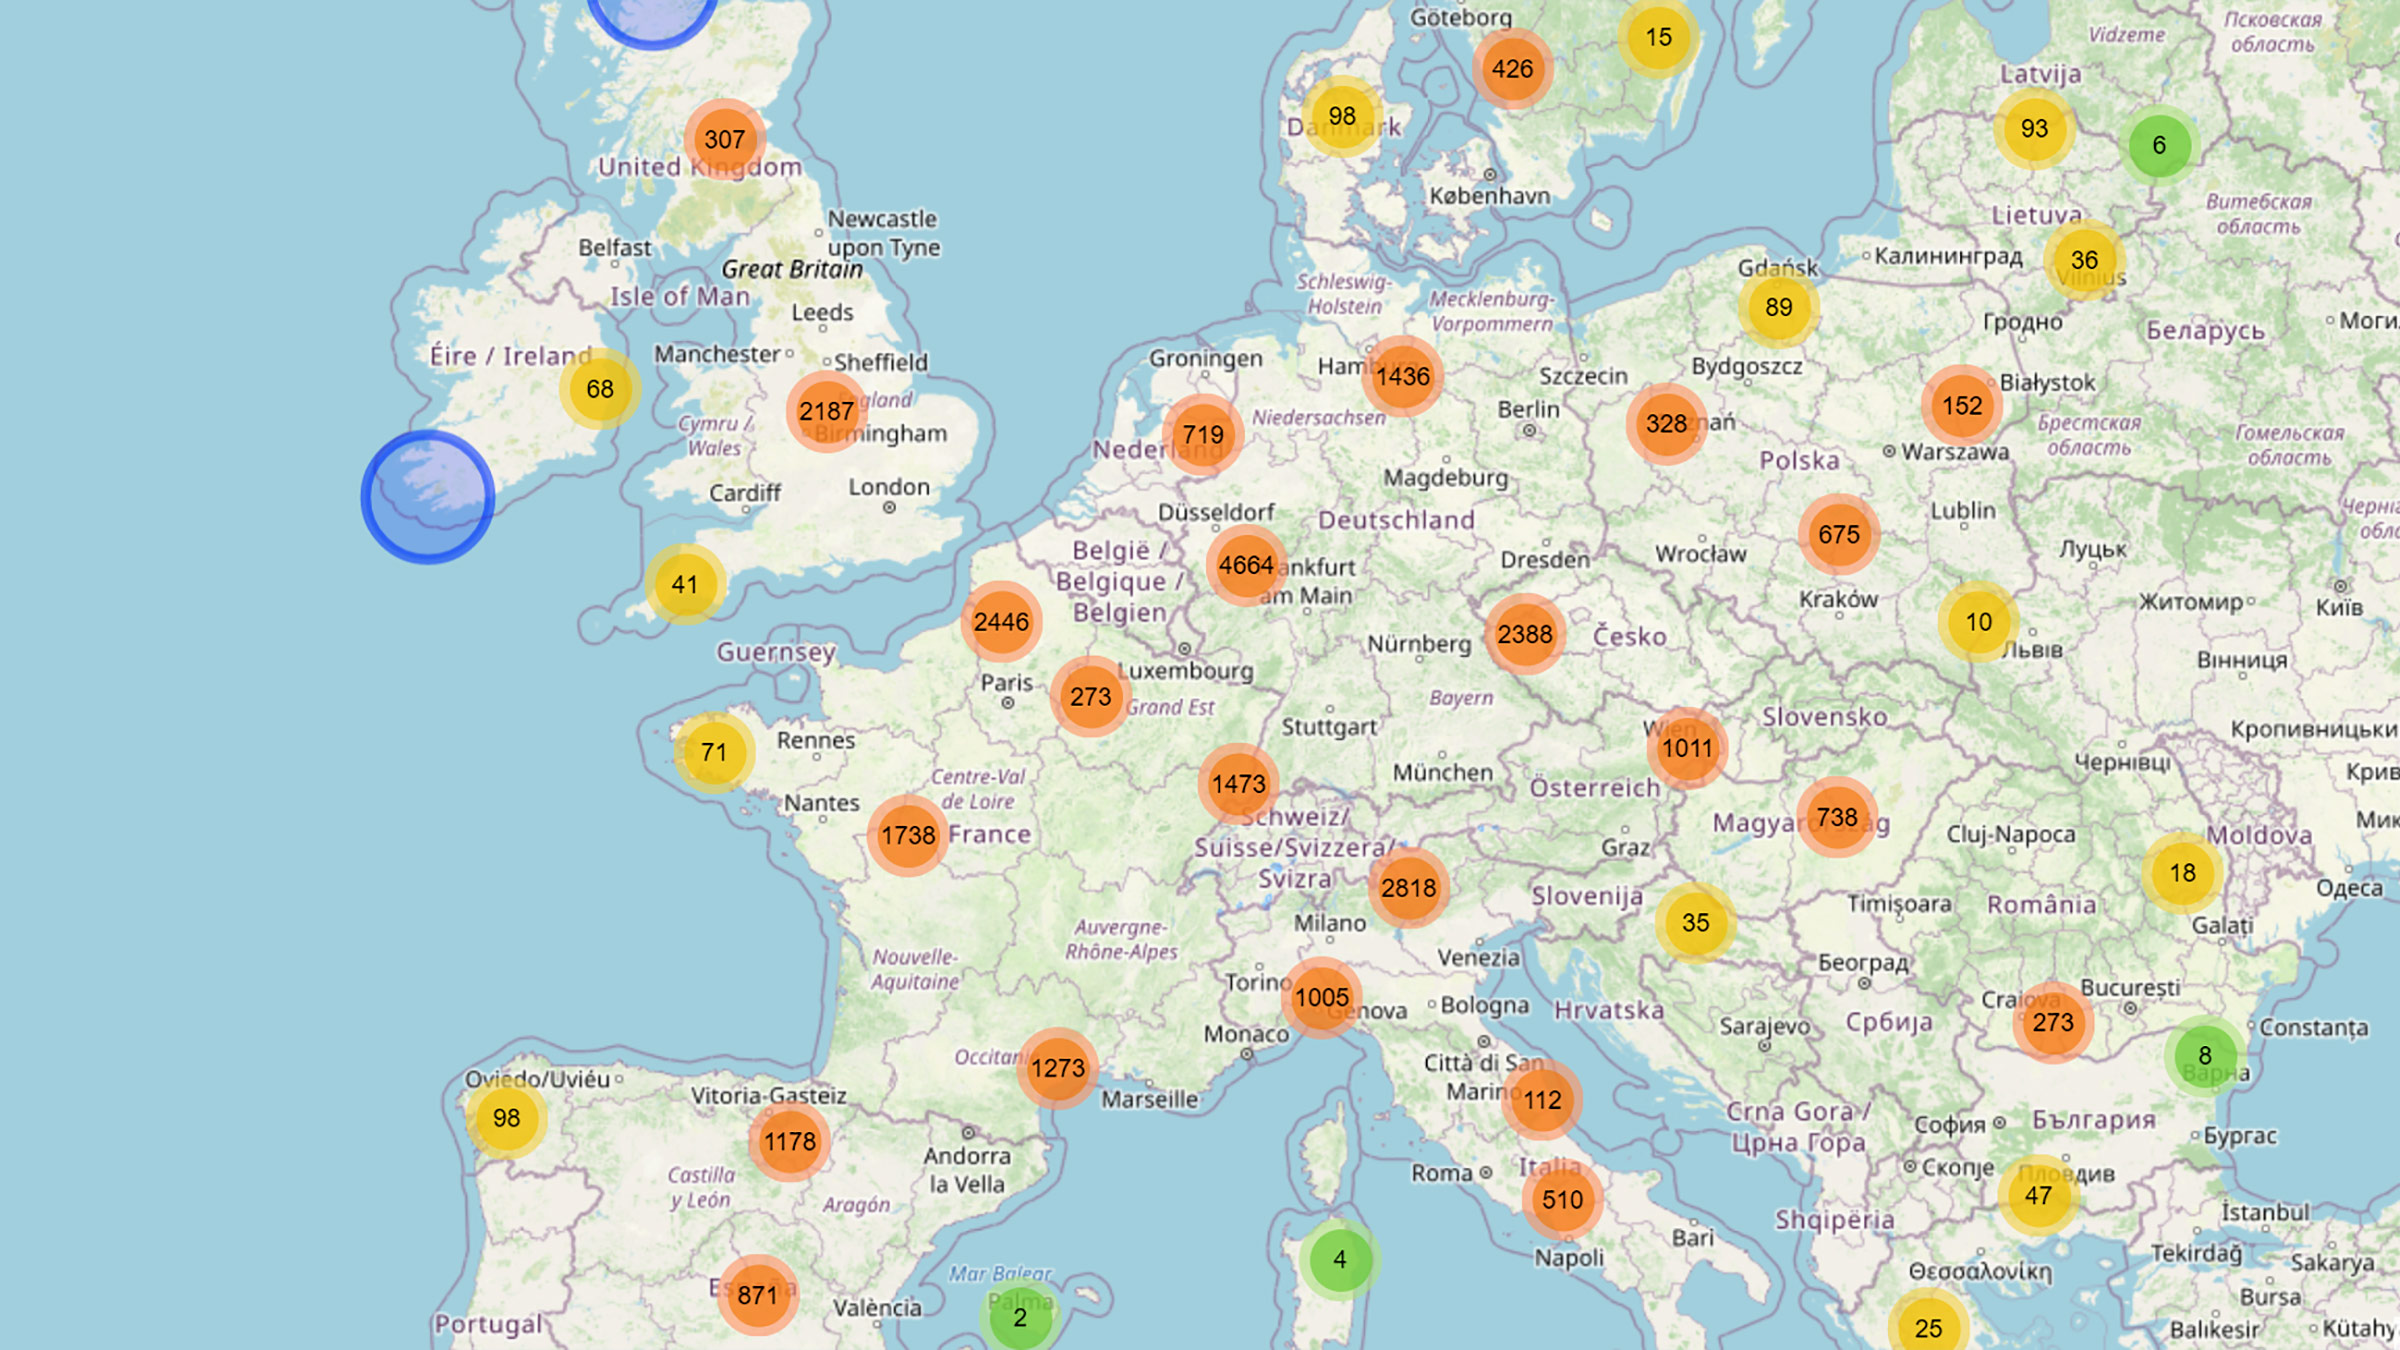 Electric trucks: new study pinpoints precise locations for charging infrastructure across EU